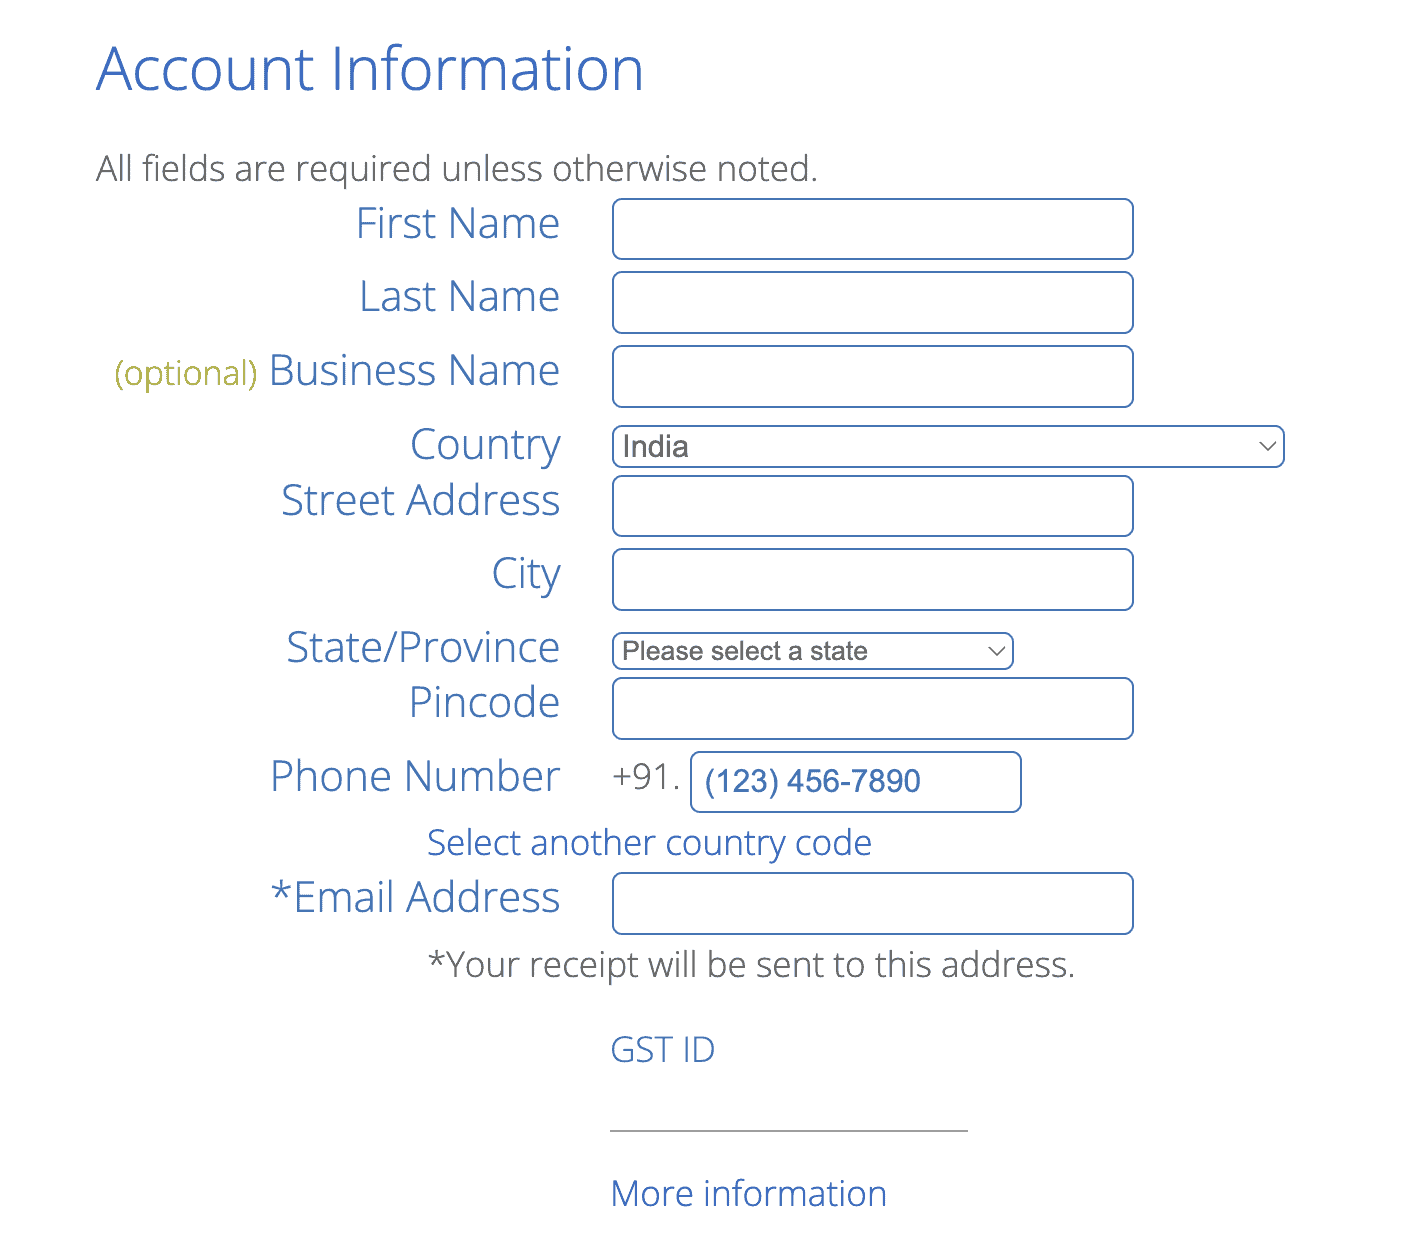 Enter your Account information